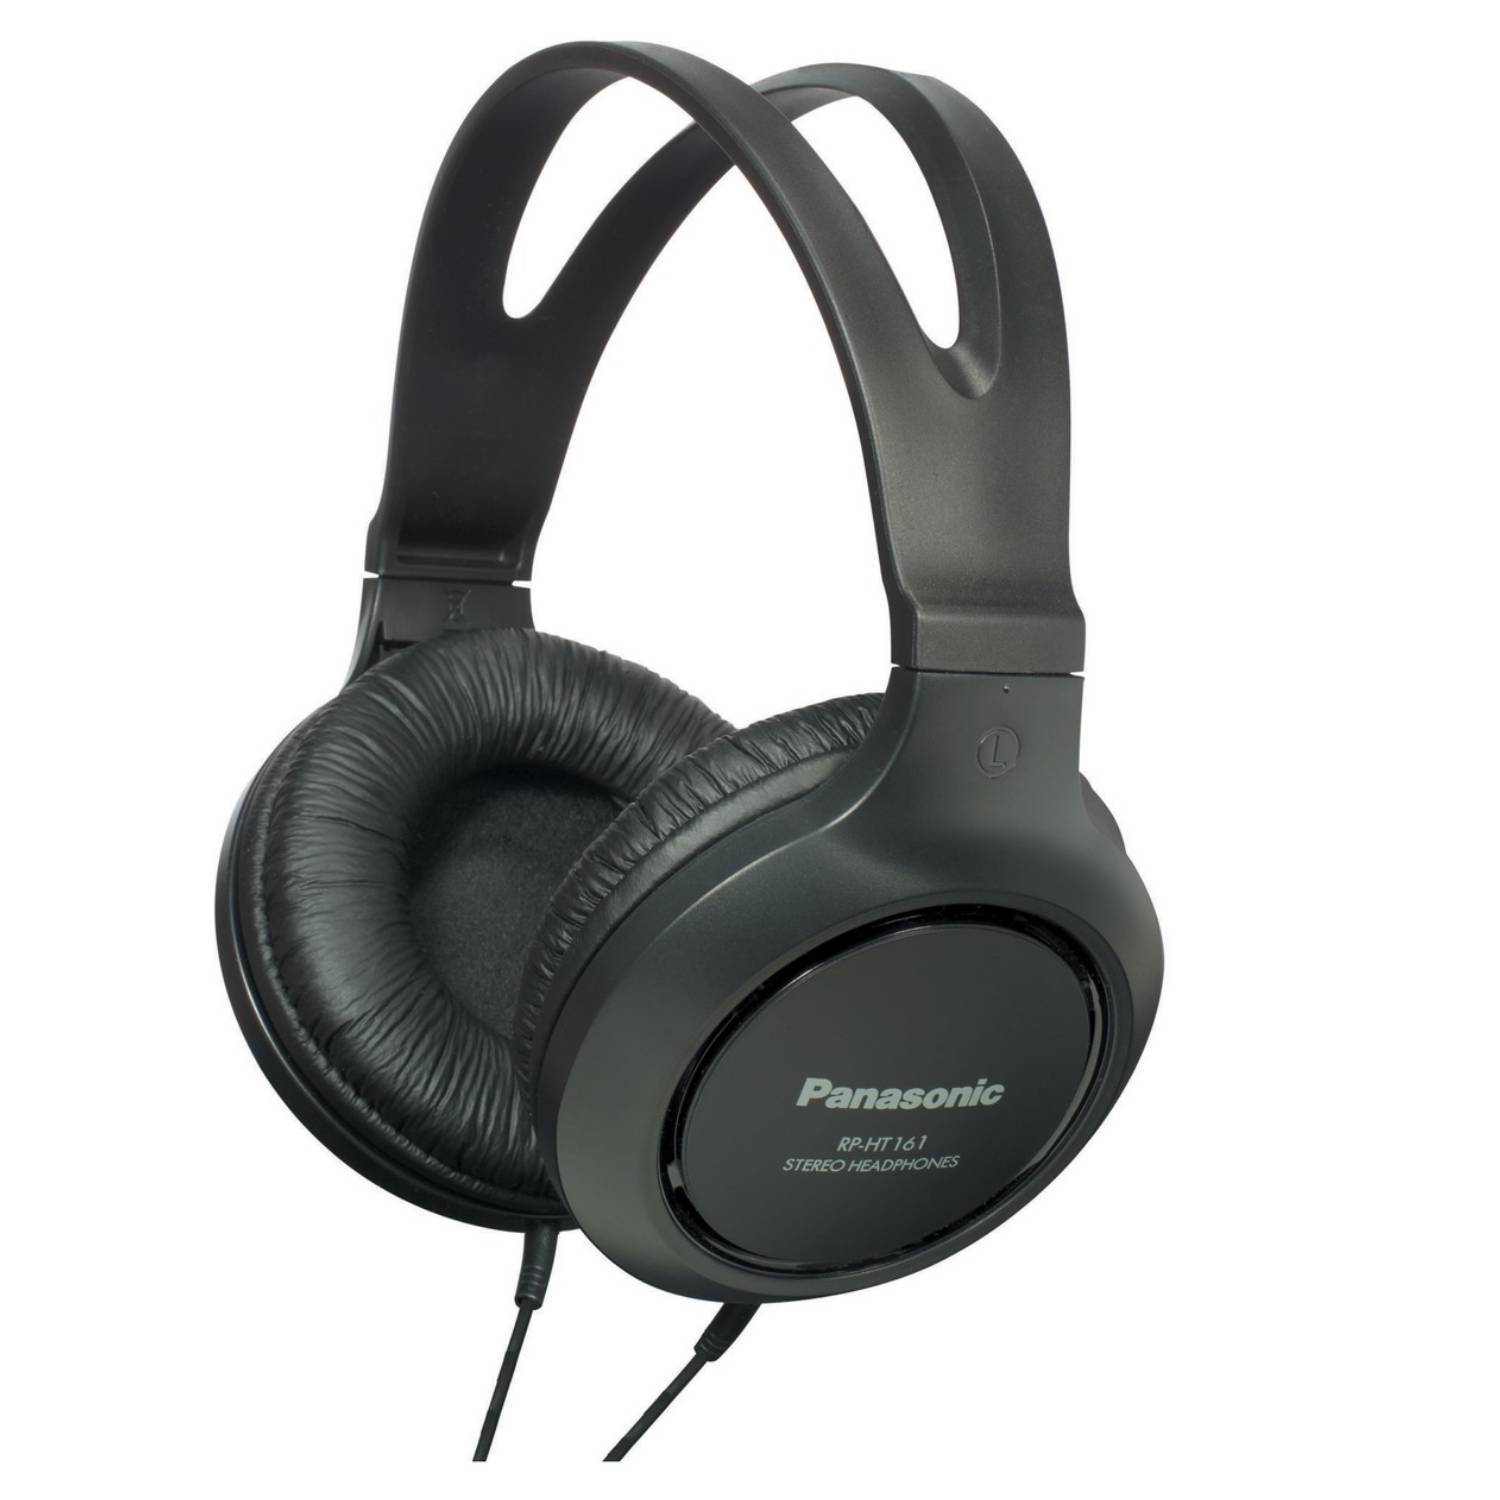 Over-Ear Wire Headphone RP-HT161